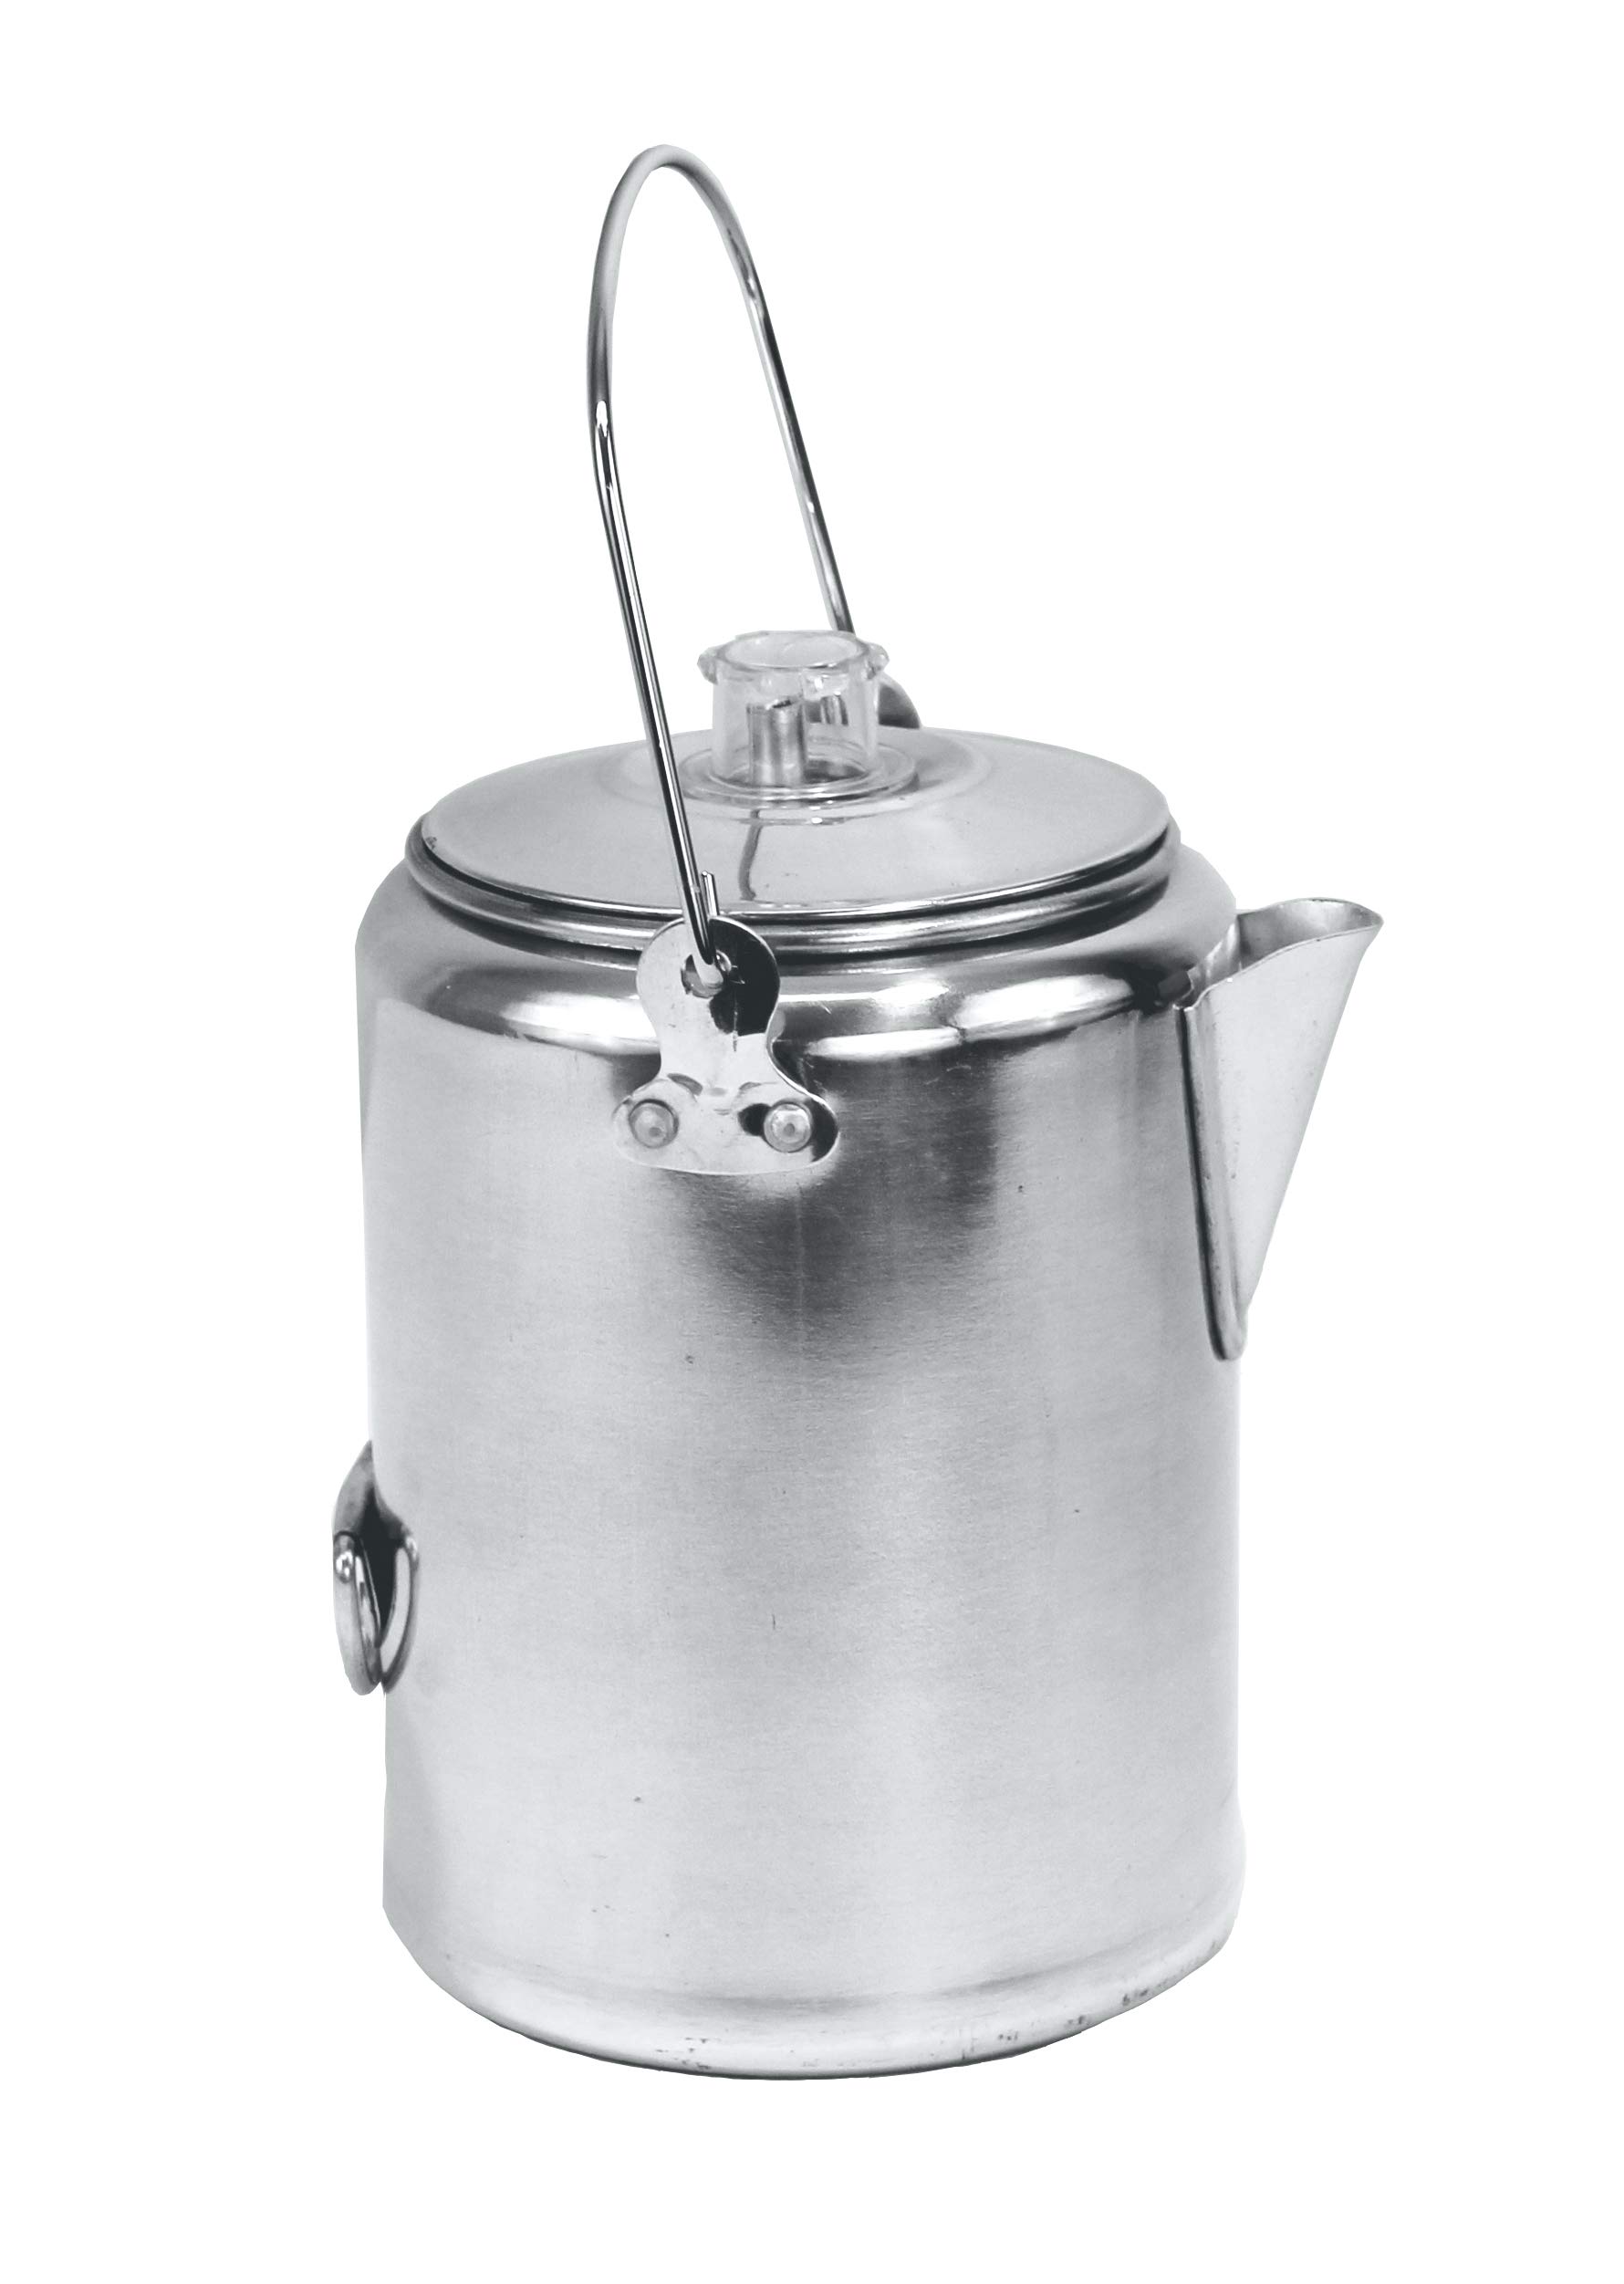 Camping Coffee Percolator Pot, Stainless Steel Coffee Maker 9 Cups